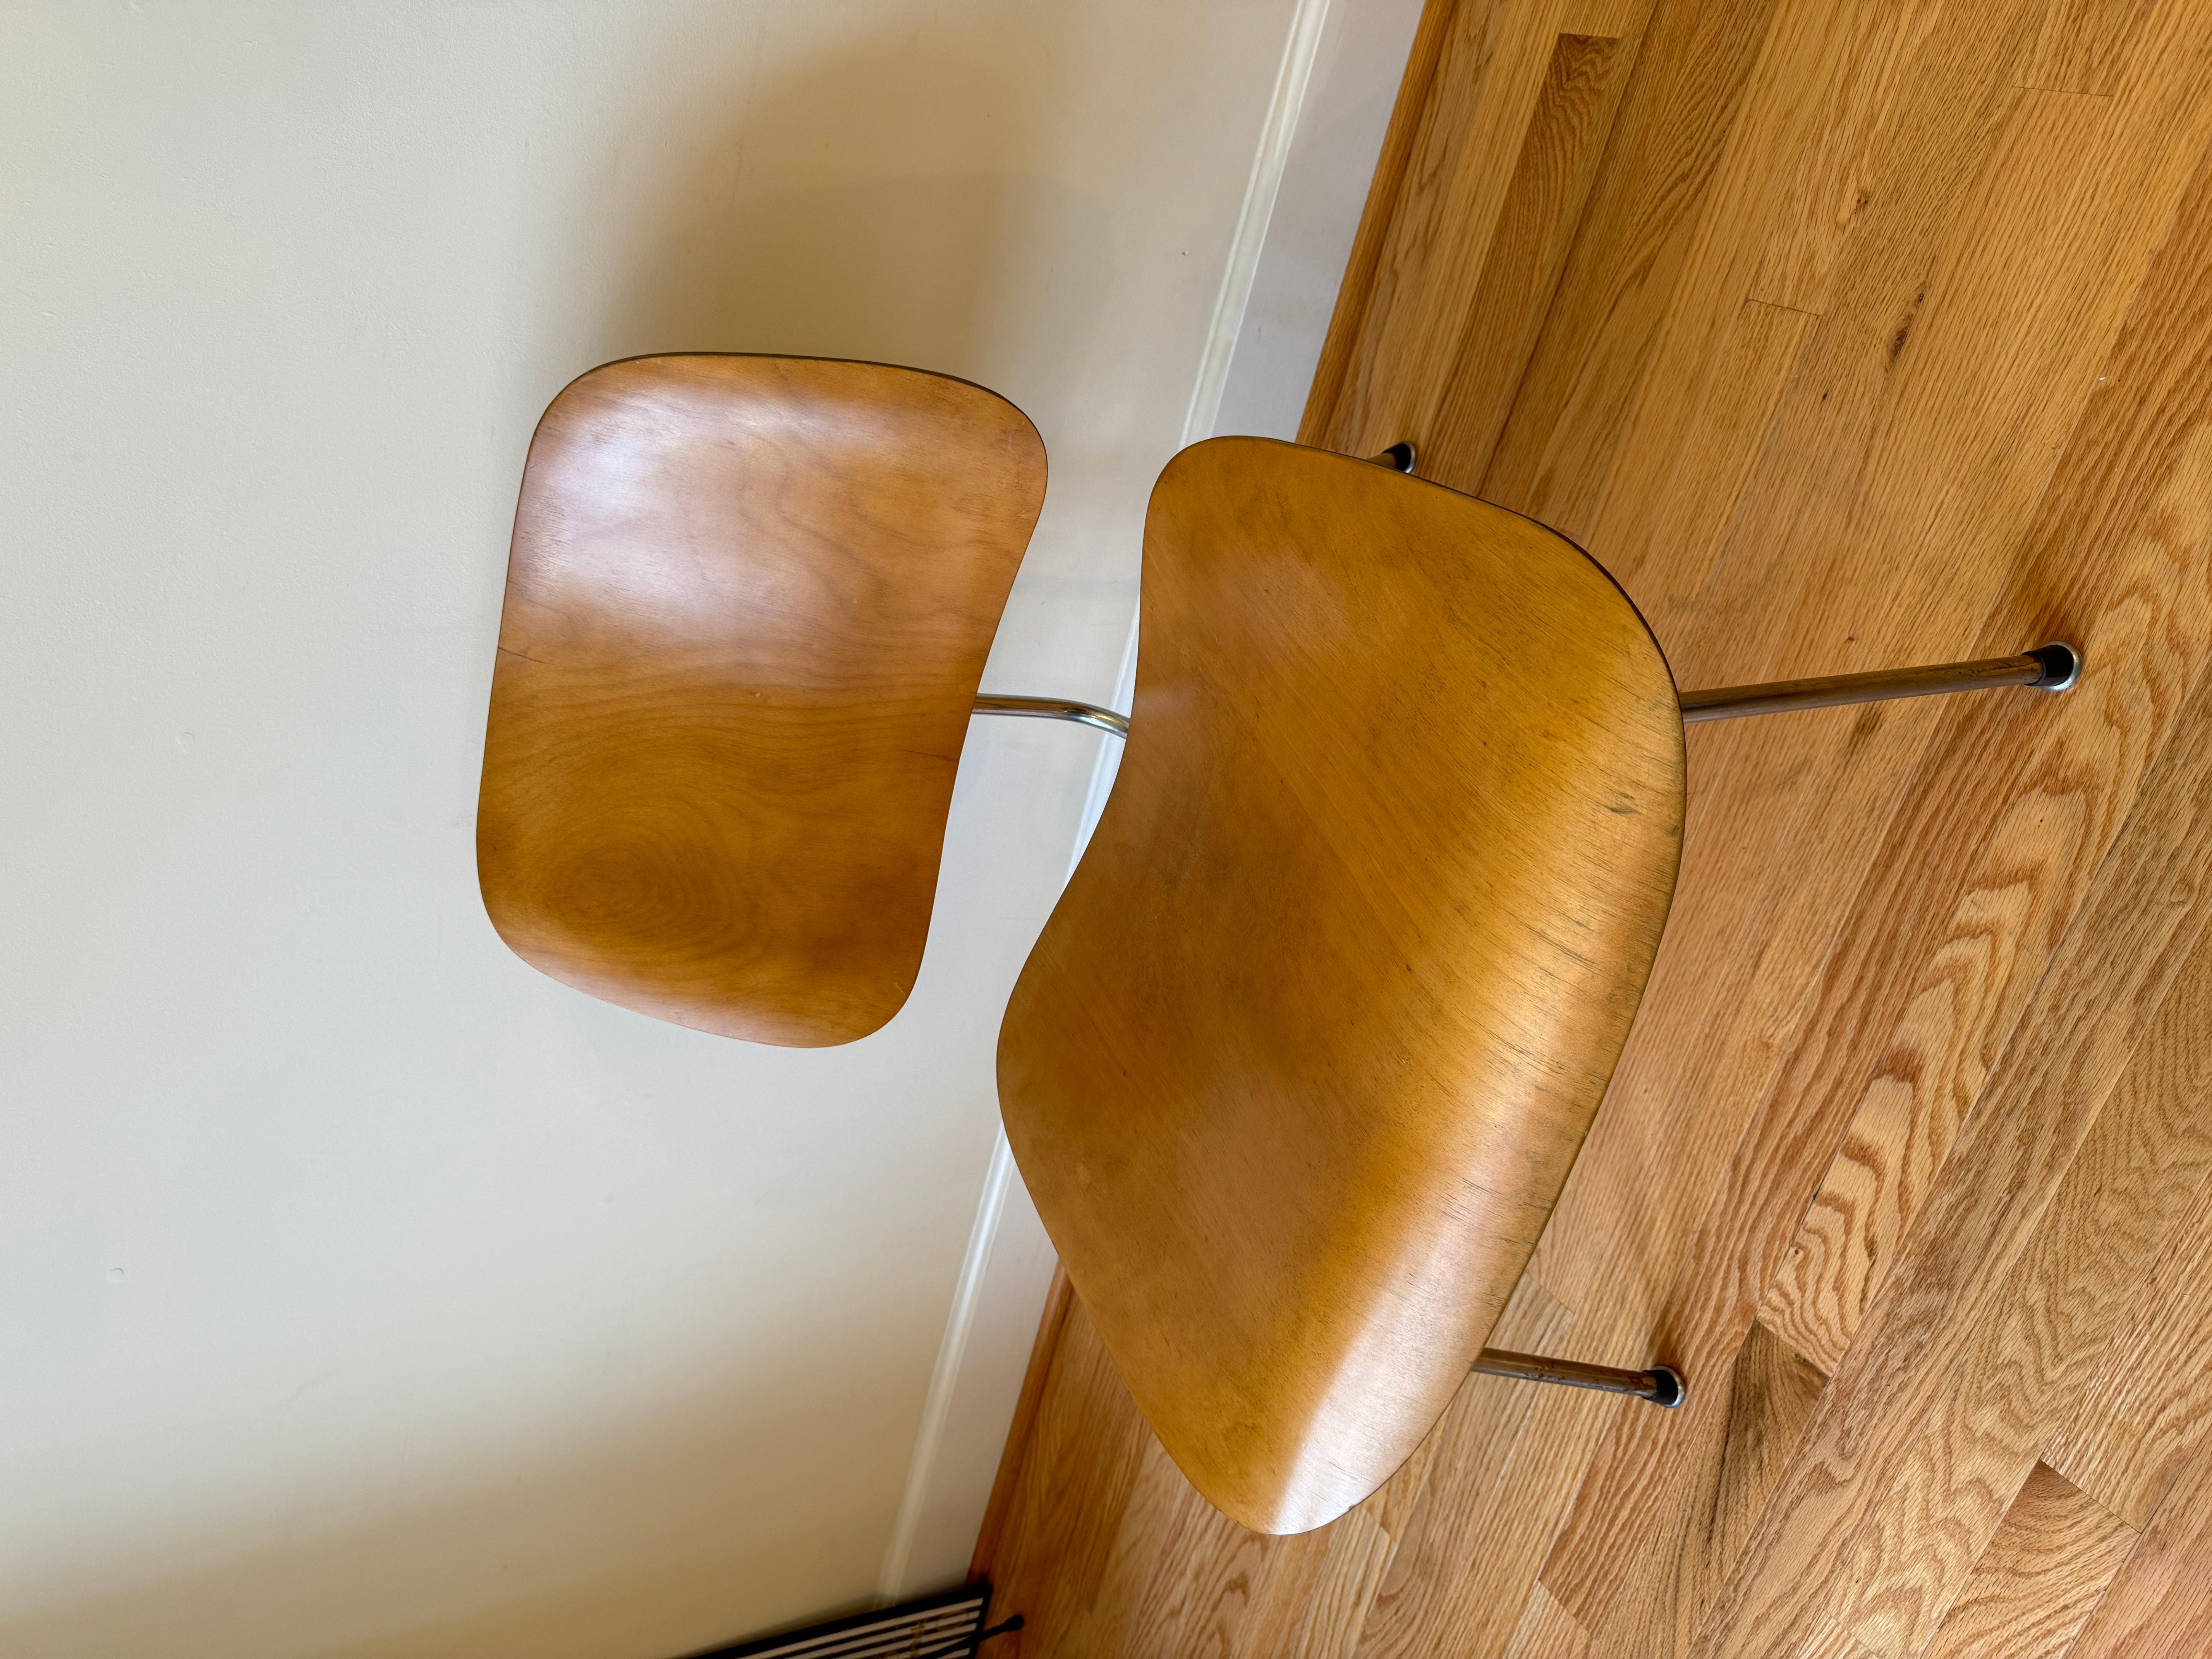 American Eames Molded Plywood Lounge Chair Metal Base (LCM), Circa 1950s For Sale